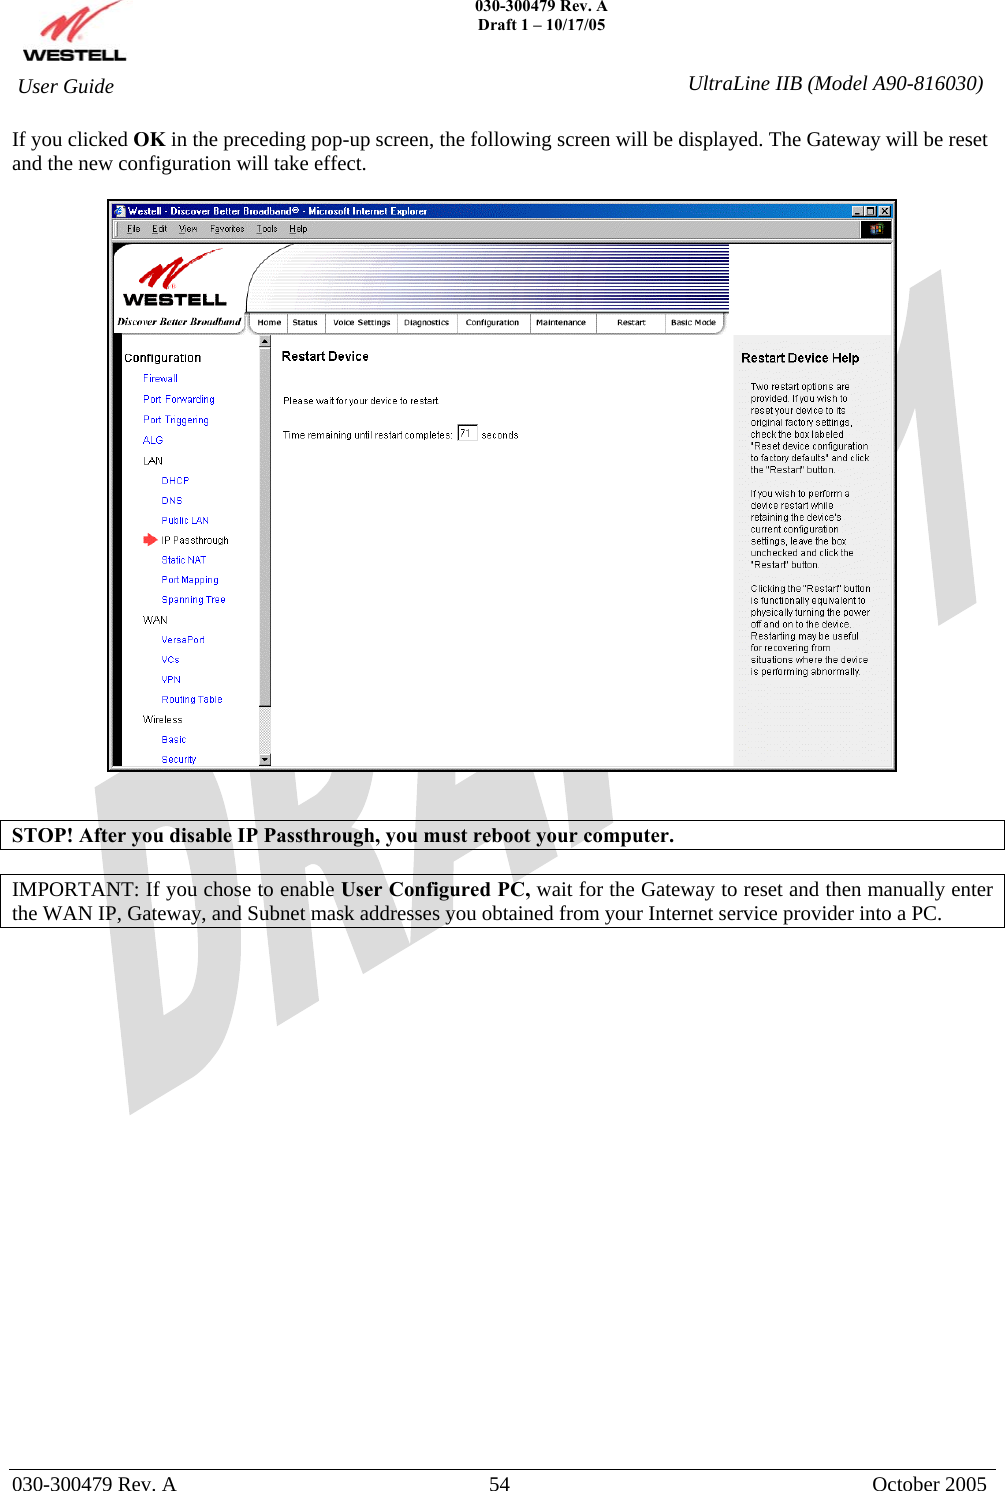    030-300479 Rev. A Draft 1 – 10/17/05   030-300479 Rev. A  54  October 2005  User Guide  UltraLine IIB (Model A90-816030)If you clicked OK in the preceding pop-up screen, the following screen will be displayed. The Gateway will be reset and the new configuration will take effect.      STOP! After you disable IP Passthrough, you must reboot your computer.  IMPORTANT: If you chose to enable User Configured PC, wait for the Gateway to reset and then manually enter the WAN IP, Gateway, and Subnet mask addresses you obtained from your Internet service provider into a PC.                       